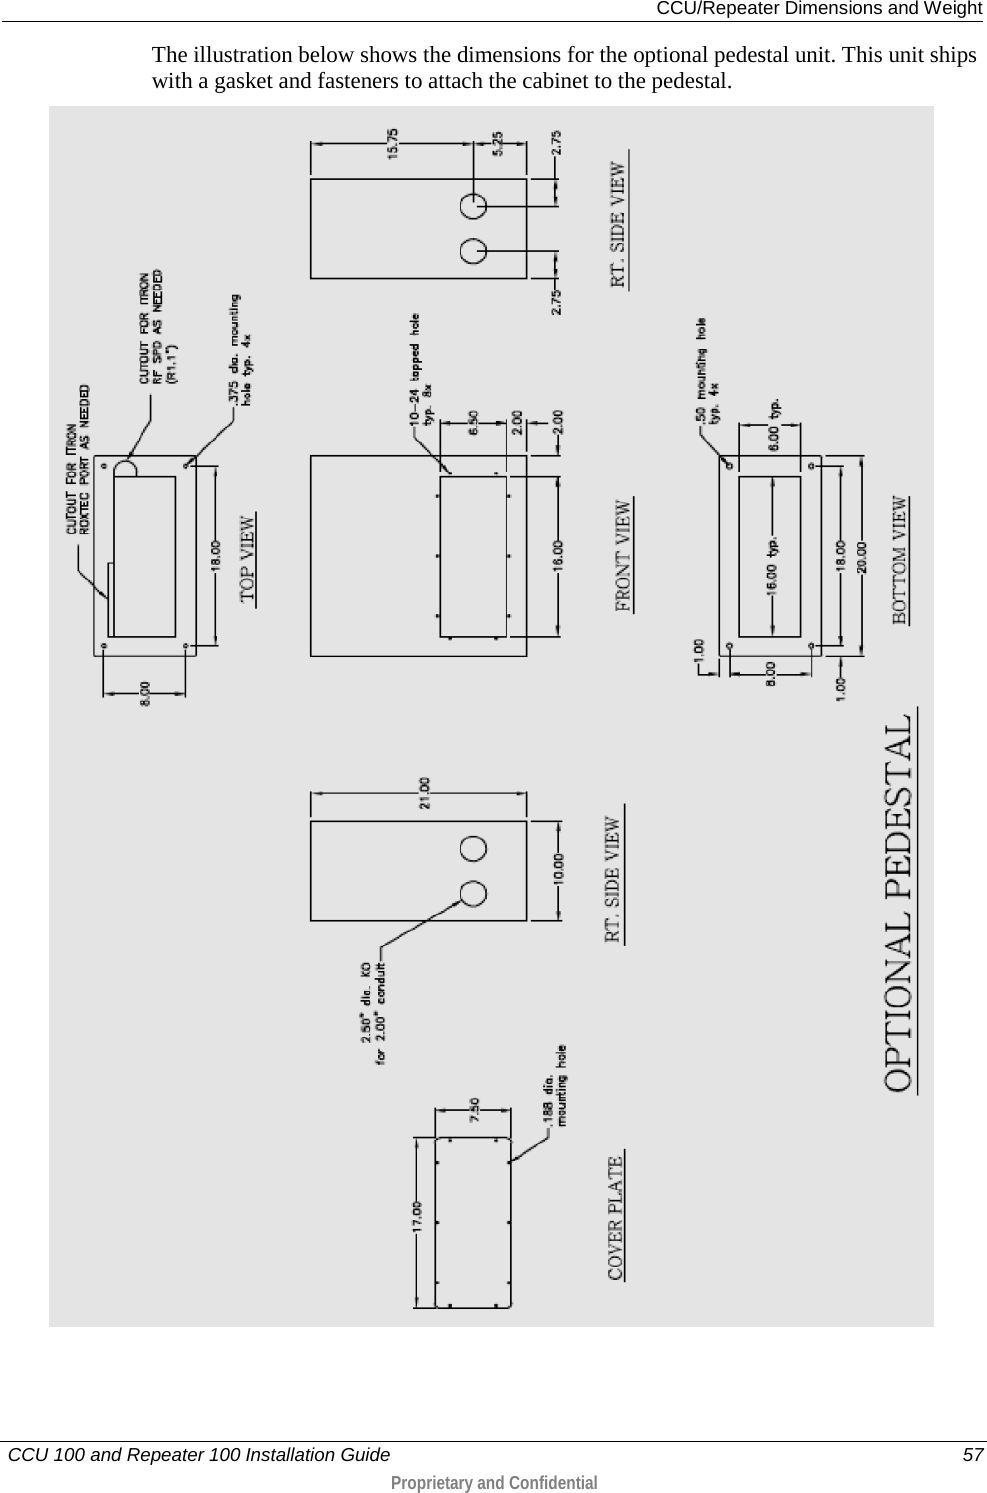  CCU/Repeater Dimensions and Weight   CCU 100 and Repeater 100 Installation Guide    57  Proprietary and Confidential  The illustration below shows the dimensions for the optional pedestal unit. This unit ships with a gasket and fasteners to attach the cabinet to the pedestal.   